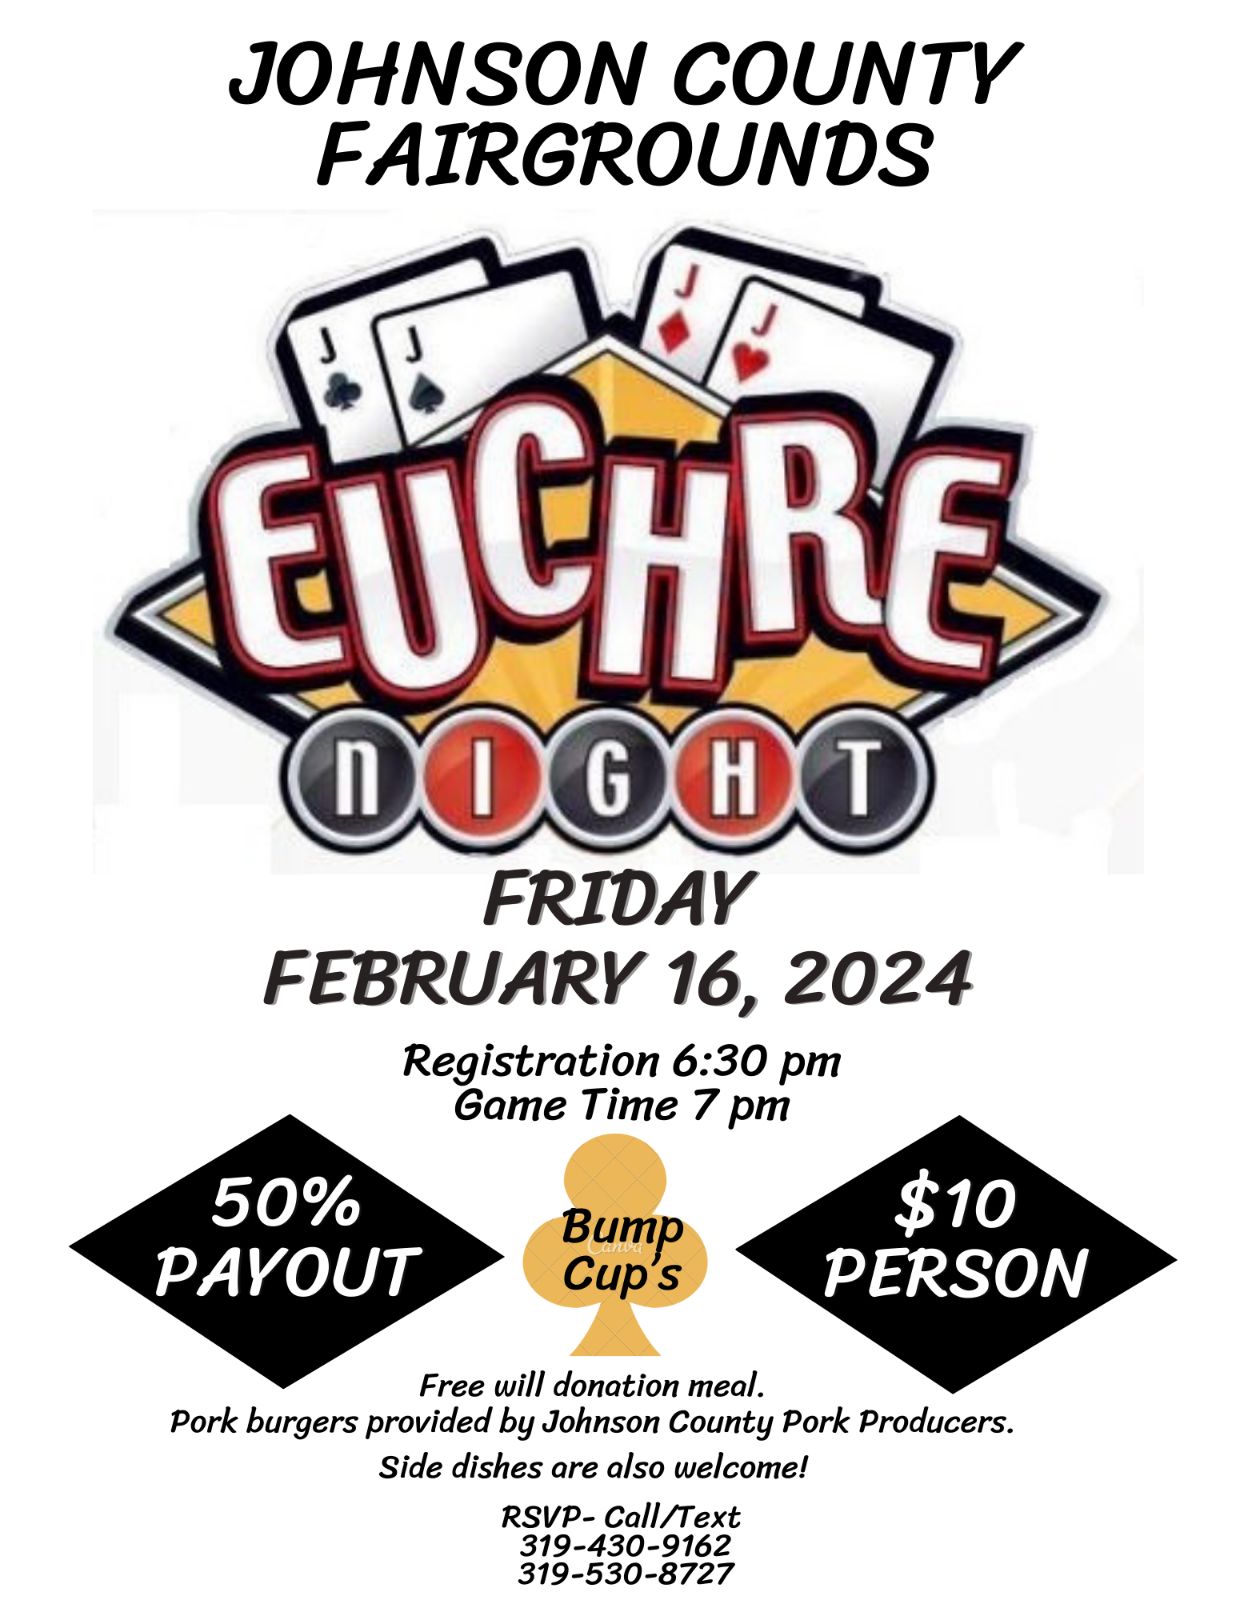 Euchre Night at the Johnson County Fairgrounds